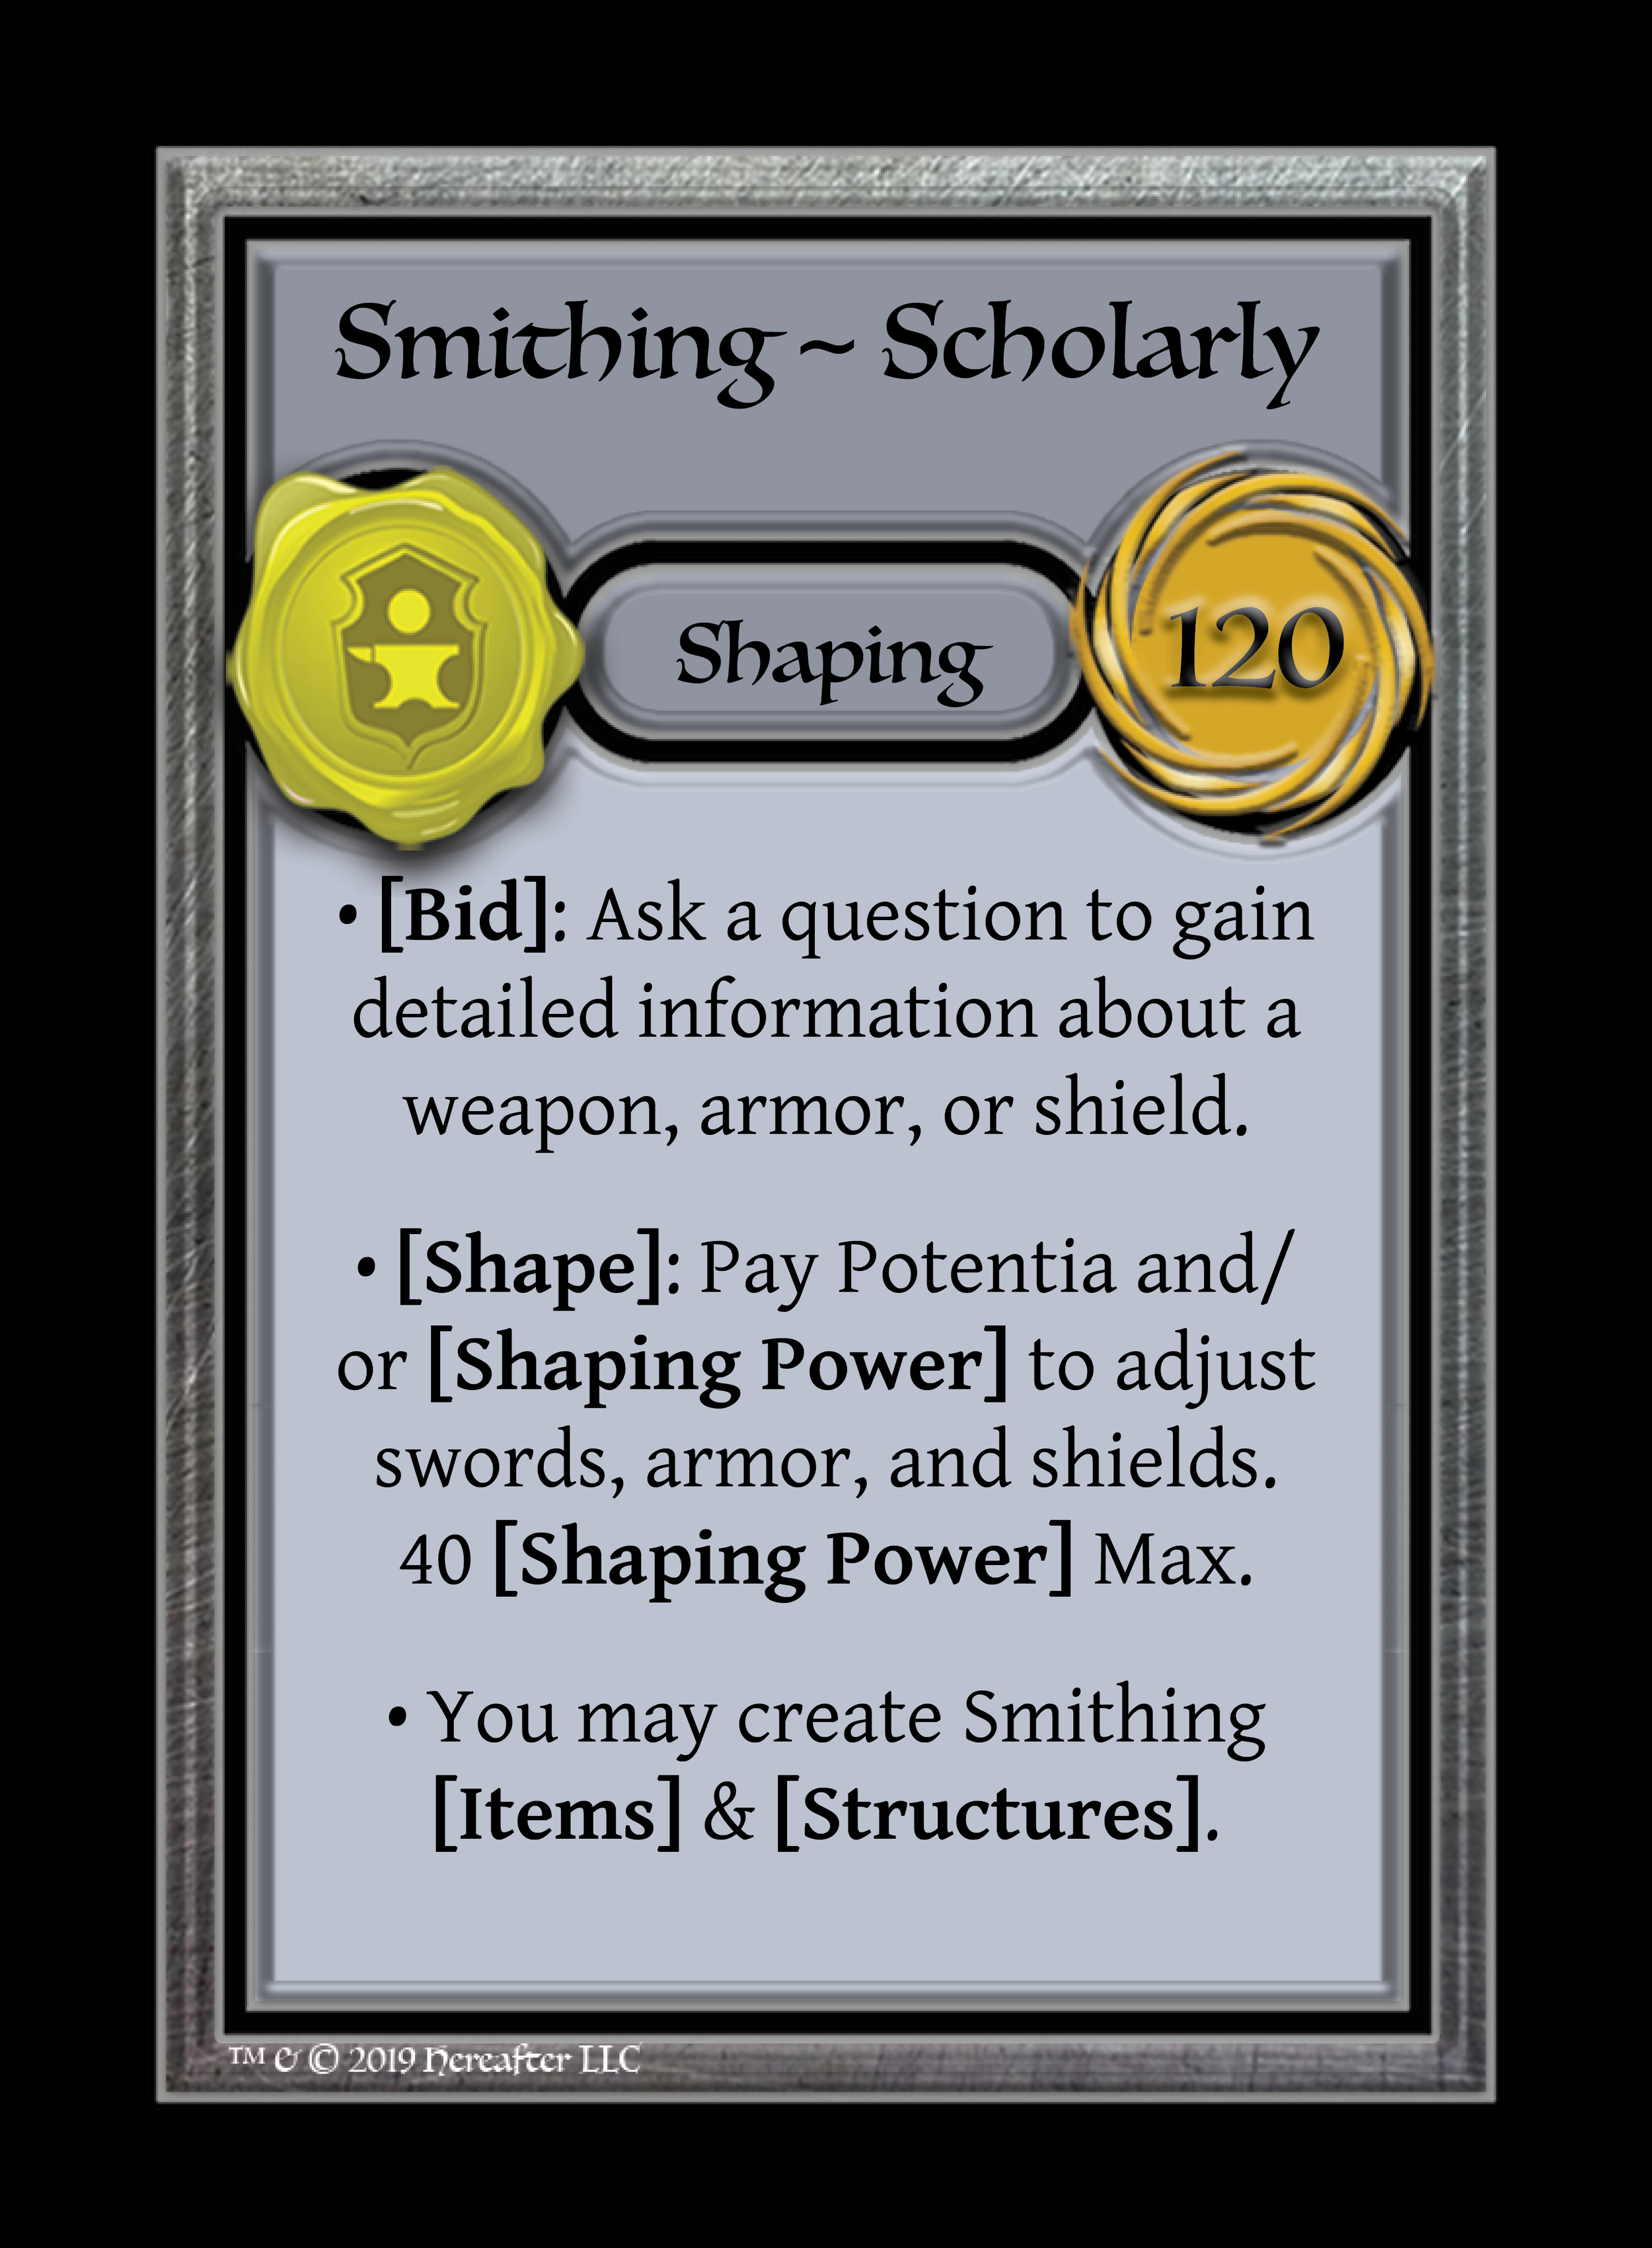 254_Shaping_Smithing ~ Scholarly_().png